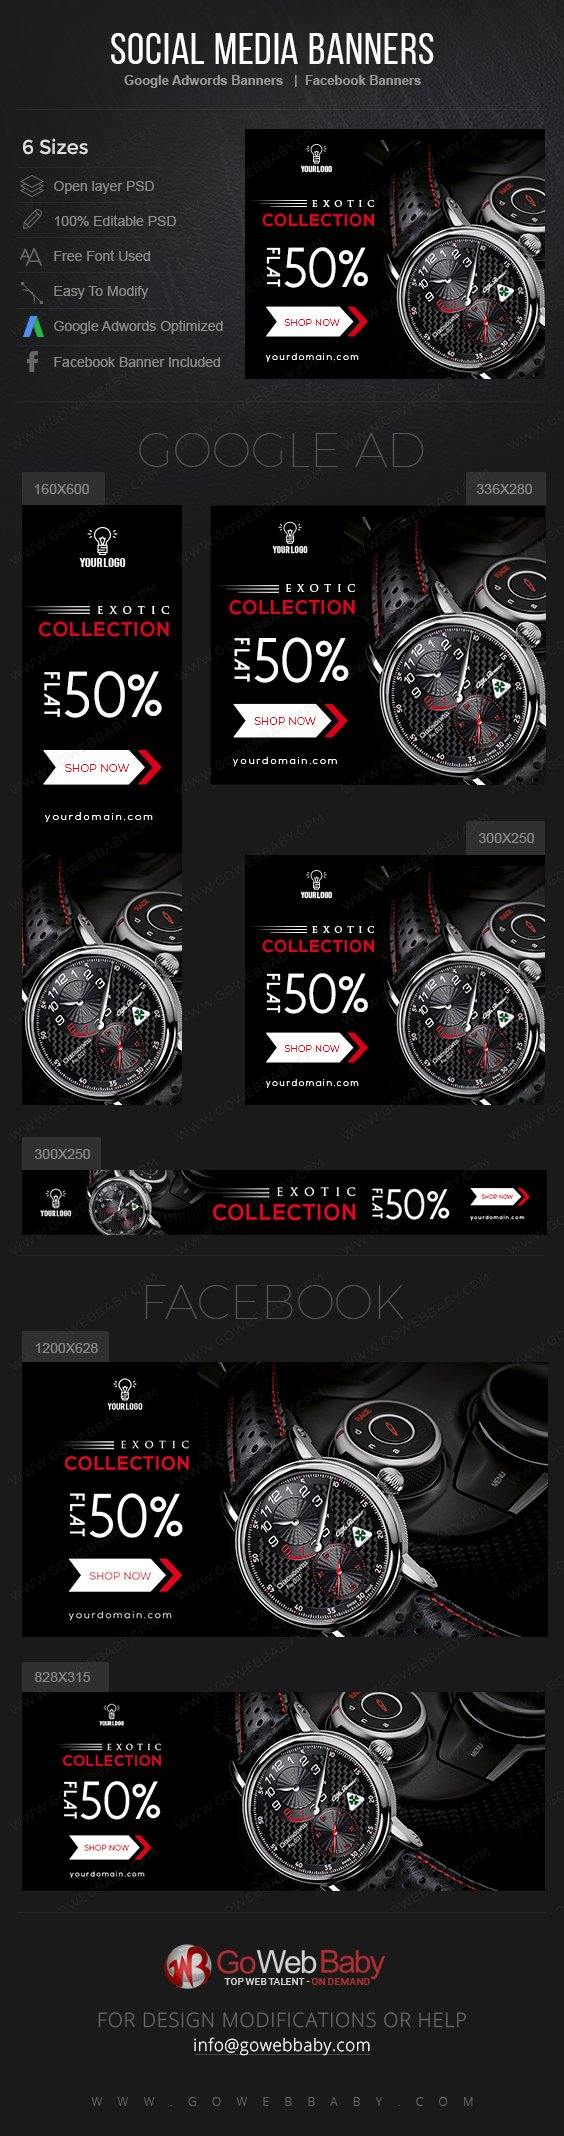 Google Adwords Display Banner With Facebook Banners - Exotic Watches For Men - GoWebBaby.Com